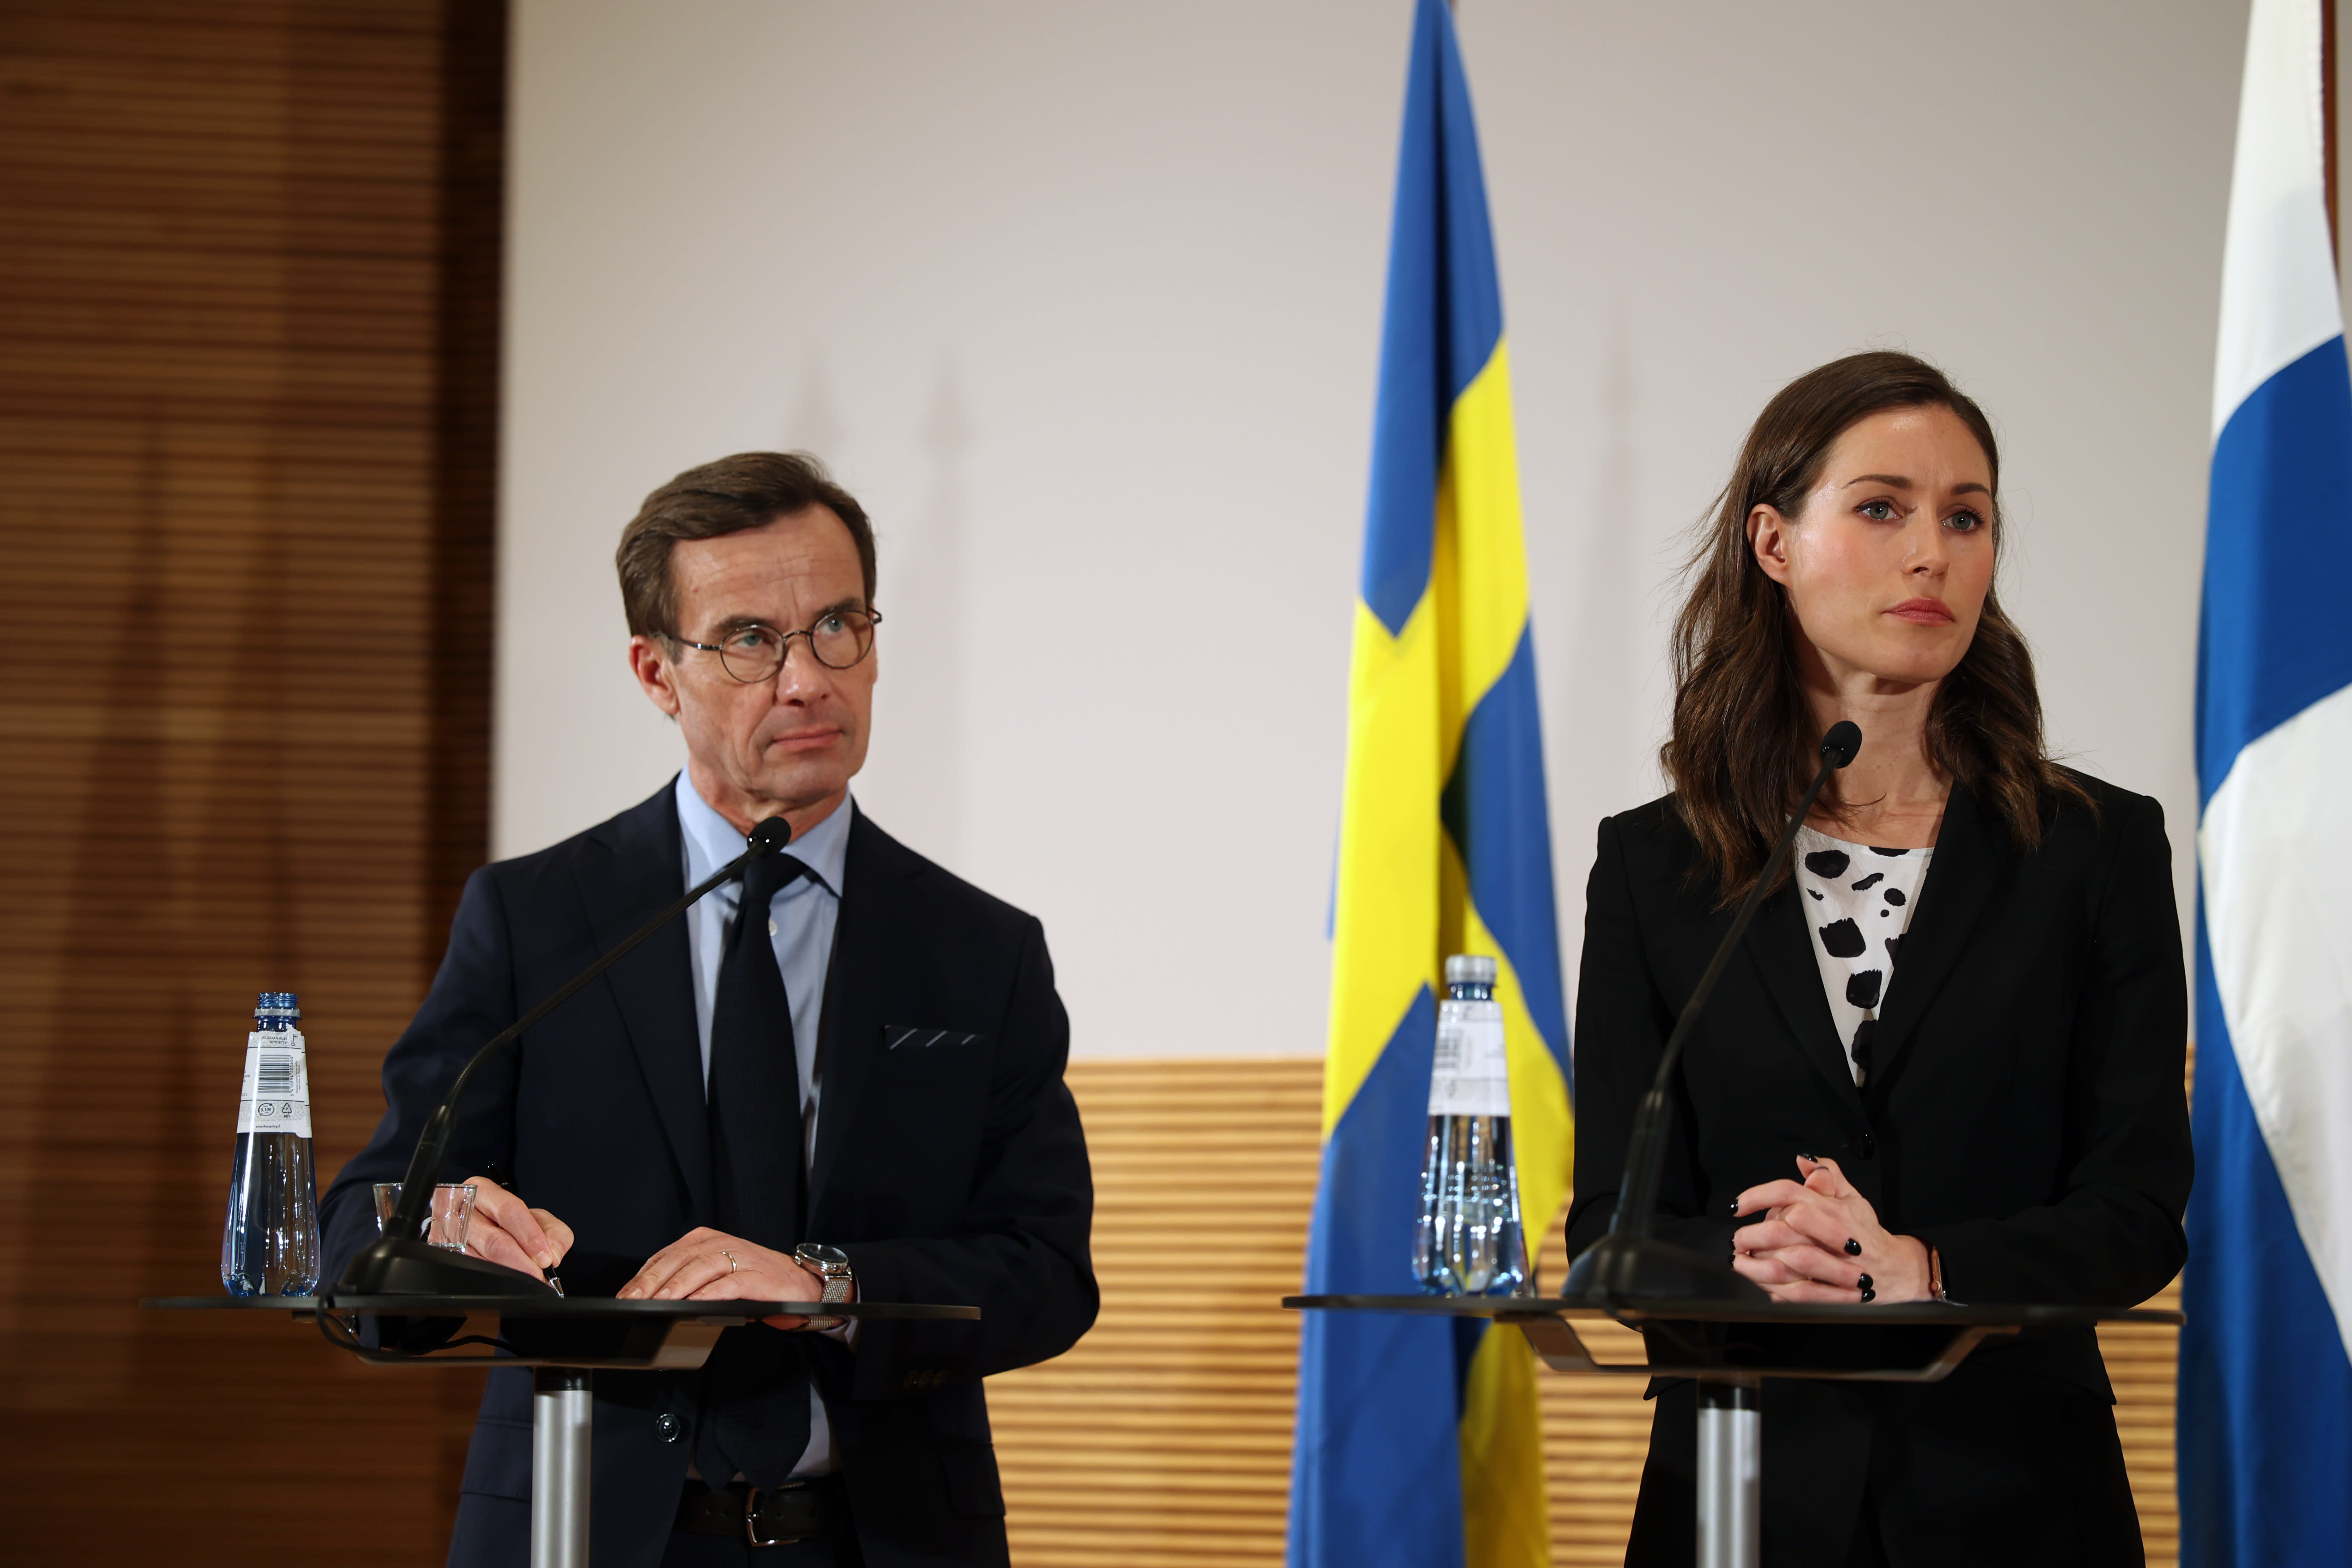 The Prime Ministers of Finland and Sweden promise that the nations will join NATO together